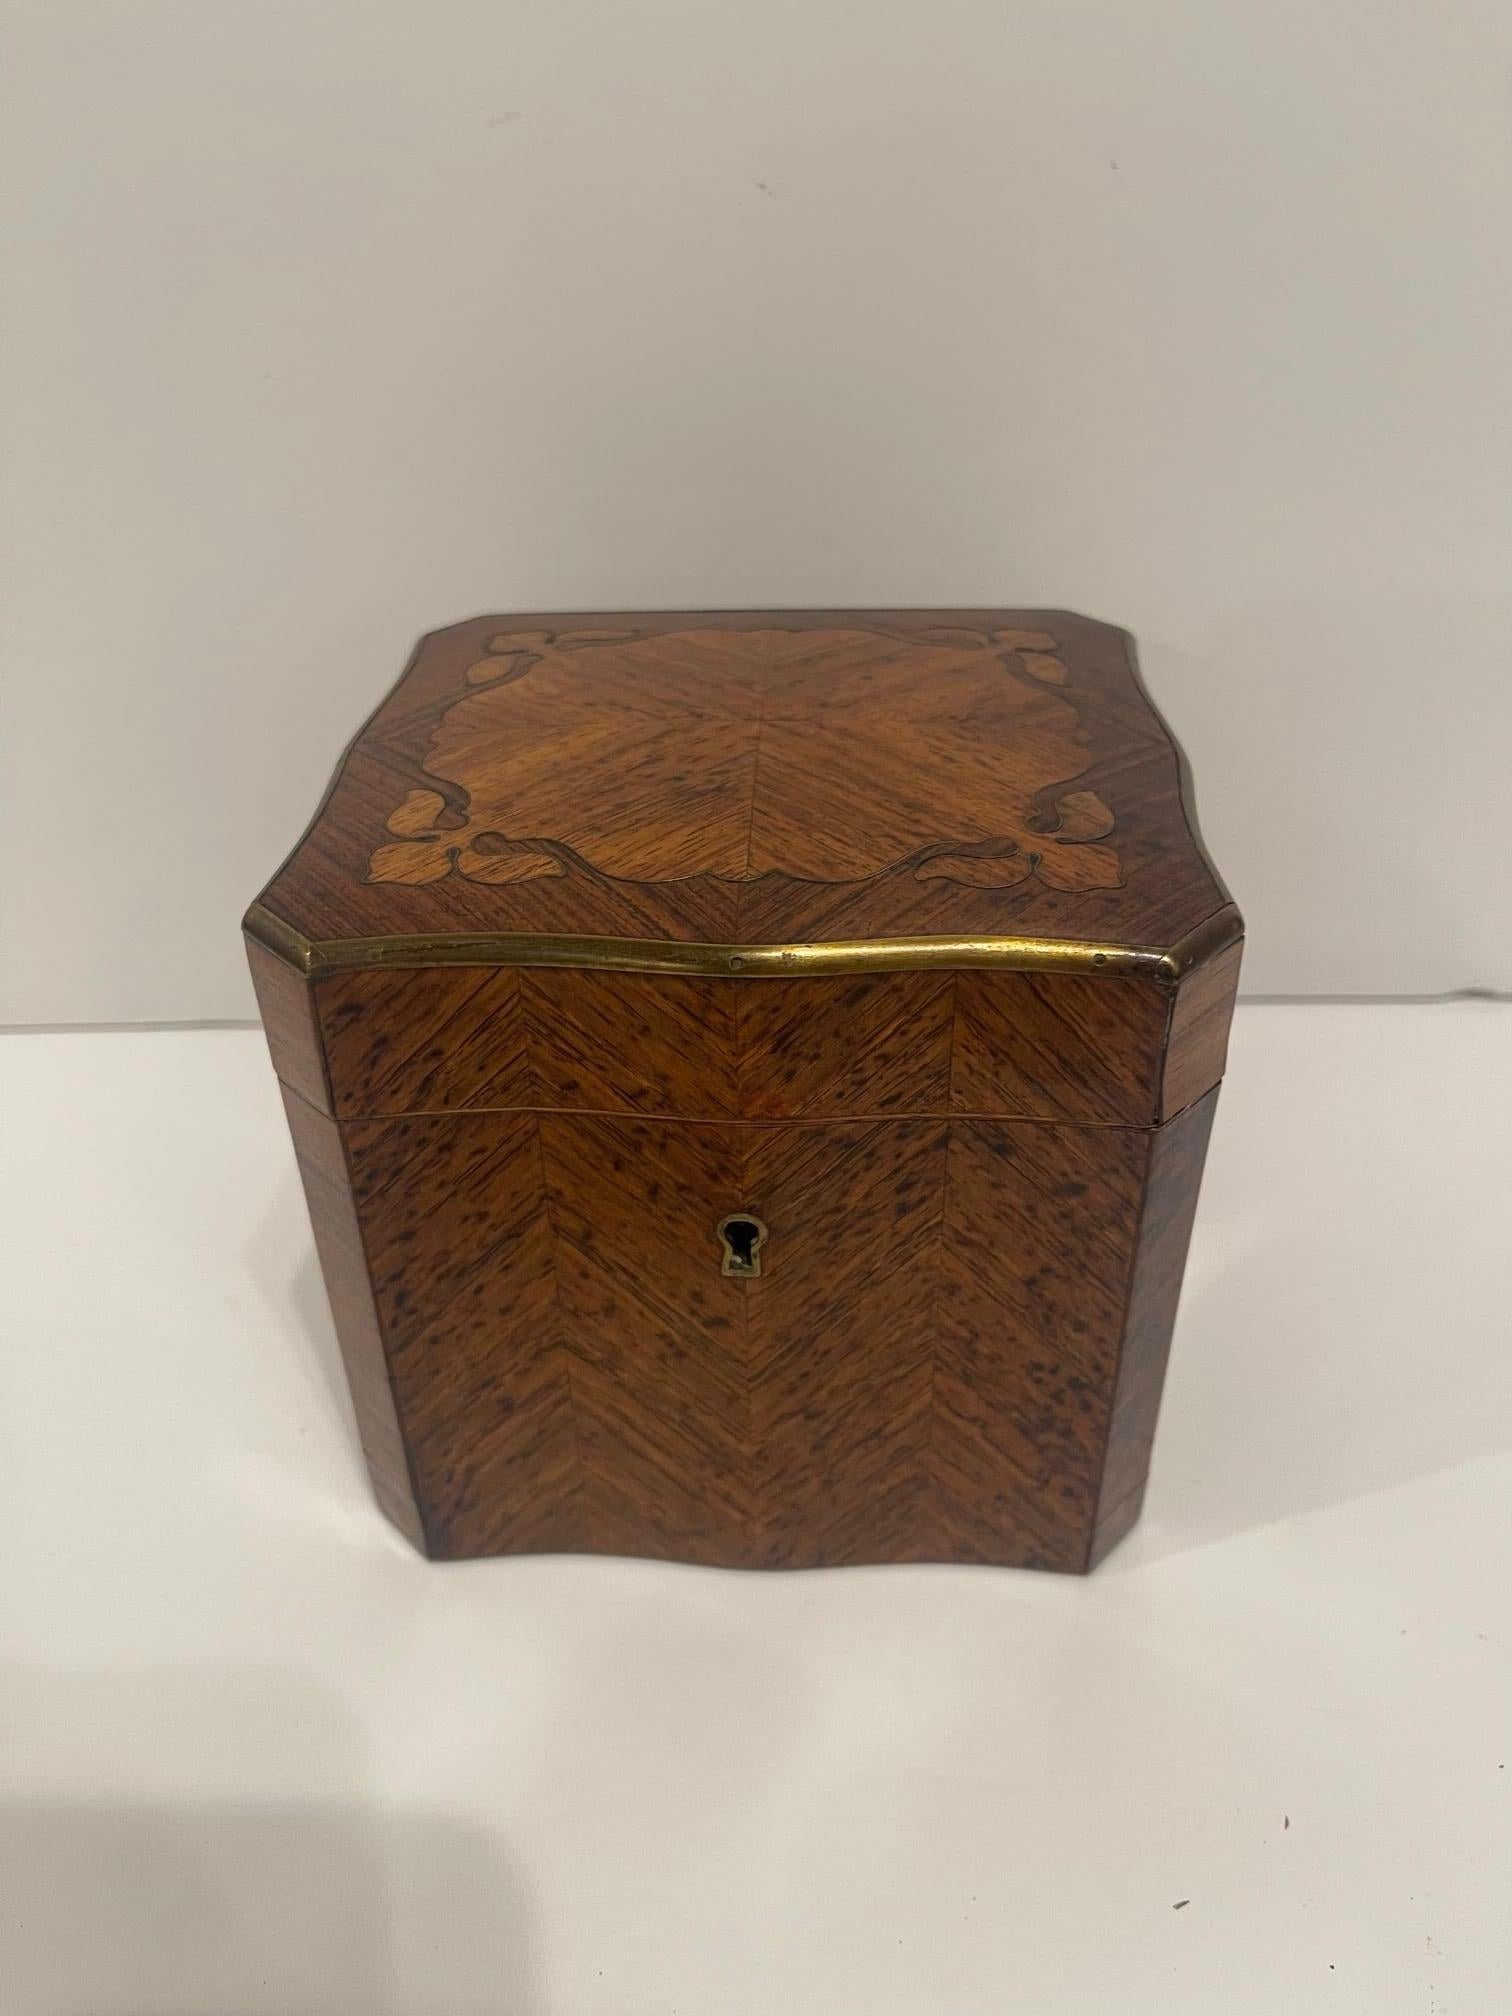 English Square Burl Tea Caddy with Brass Stringing and Interior Lid, 19th Century